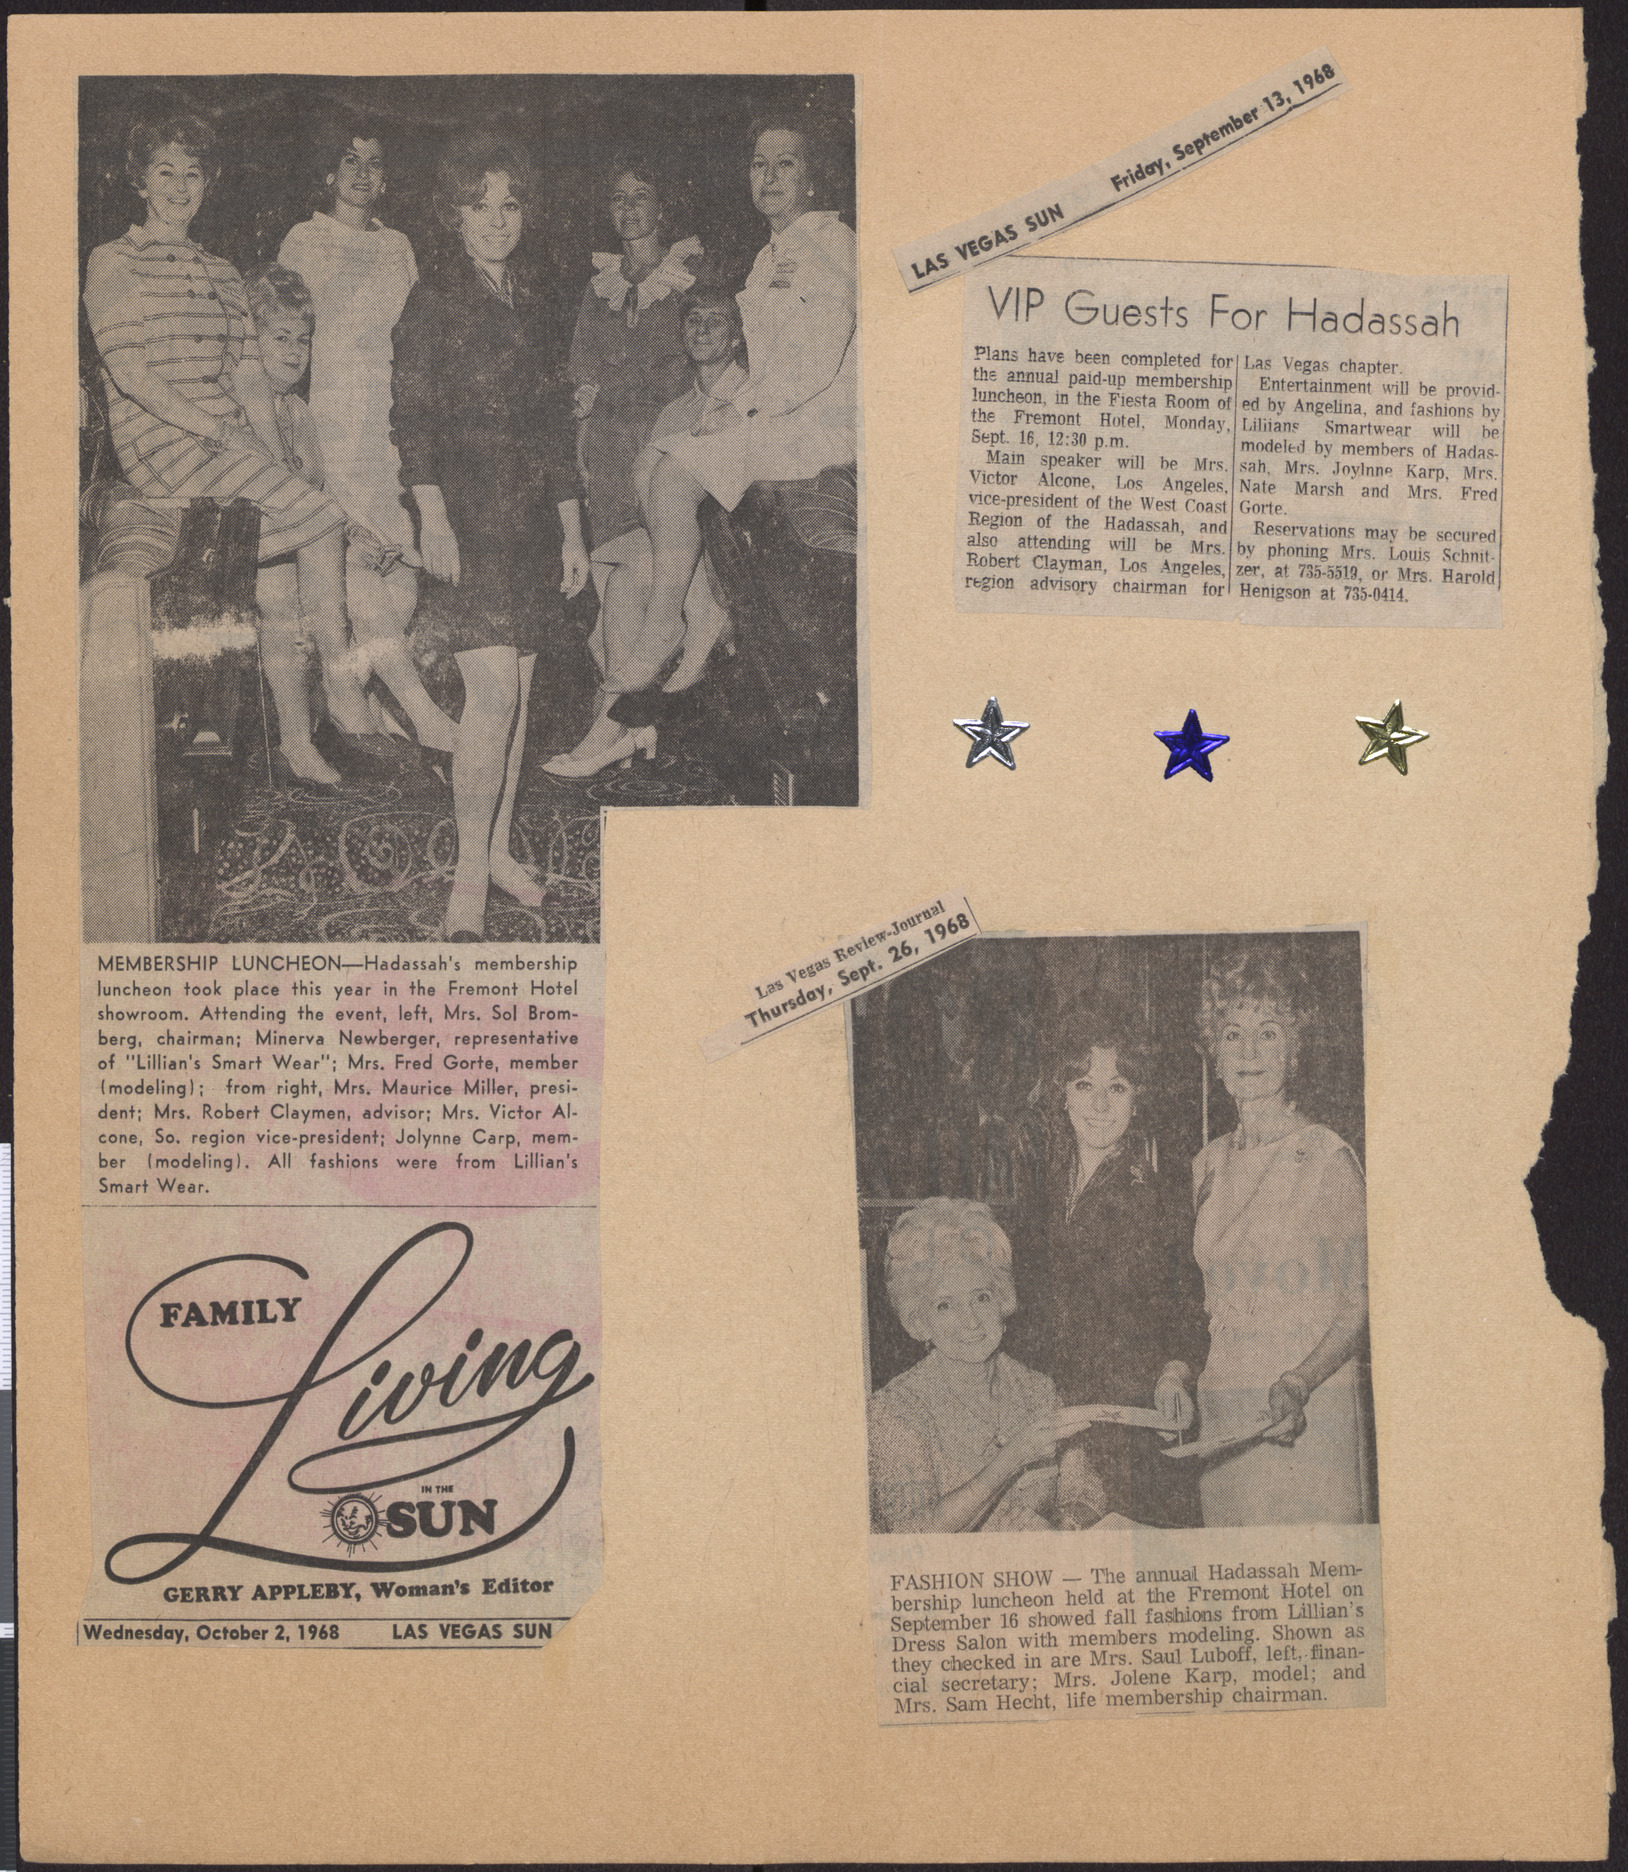 Newspaper clippings about Hadassah membership luncheon and fashion show, September/October 1968